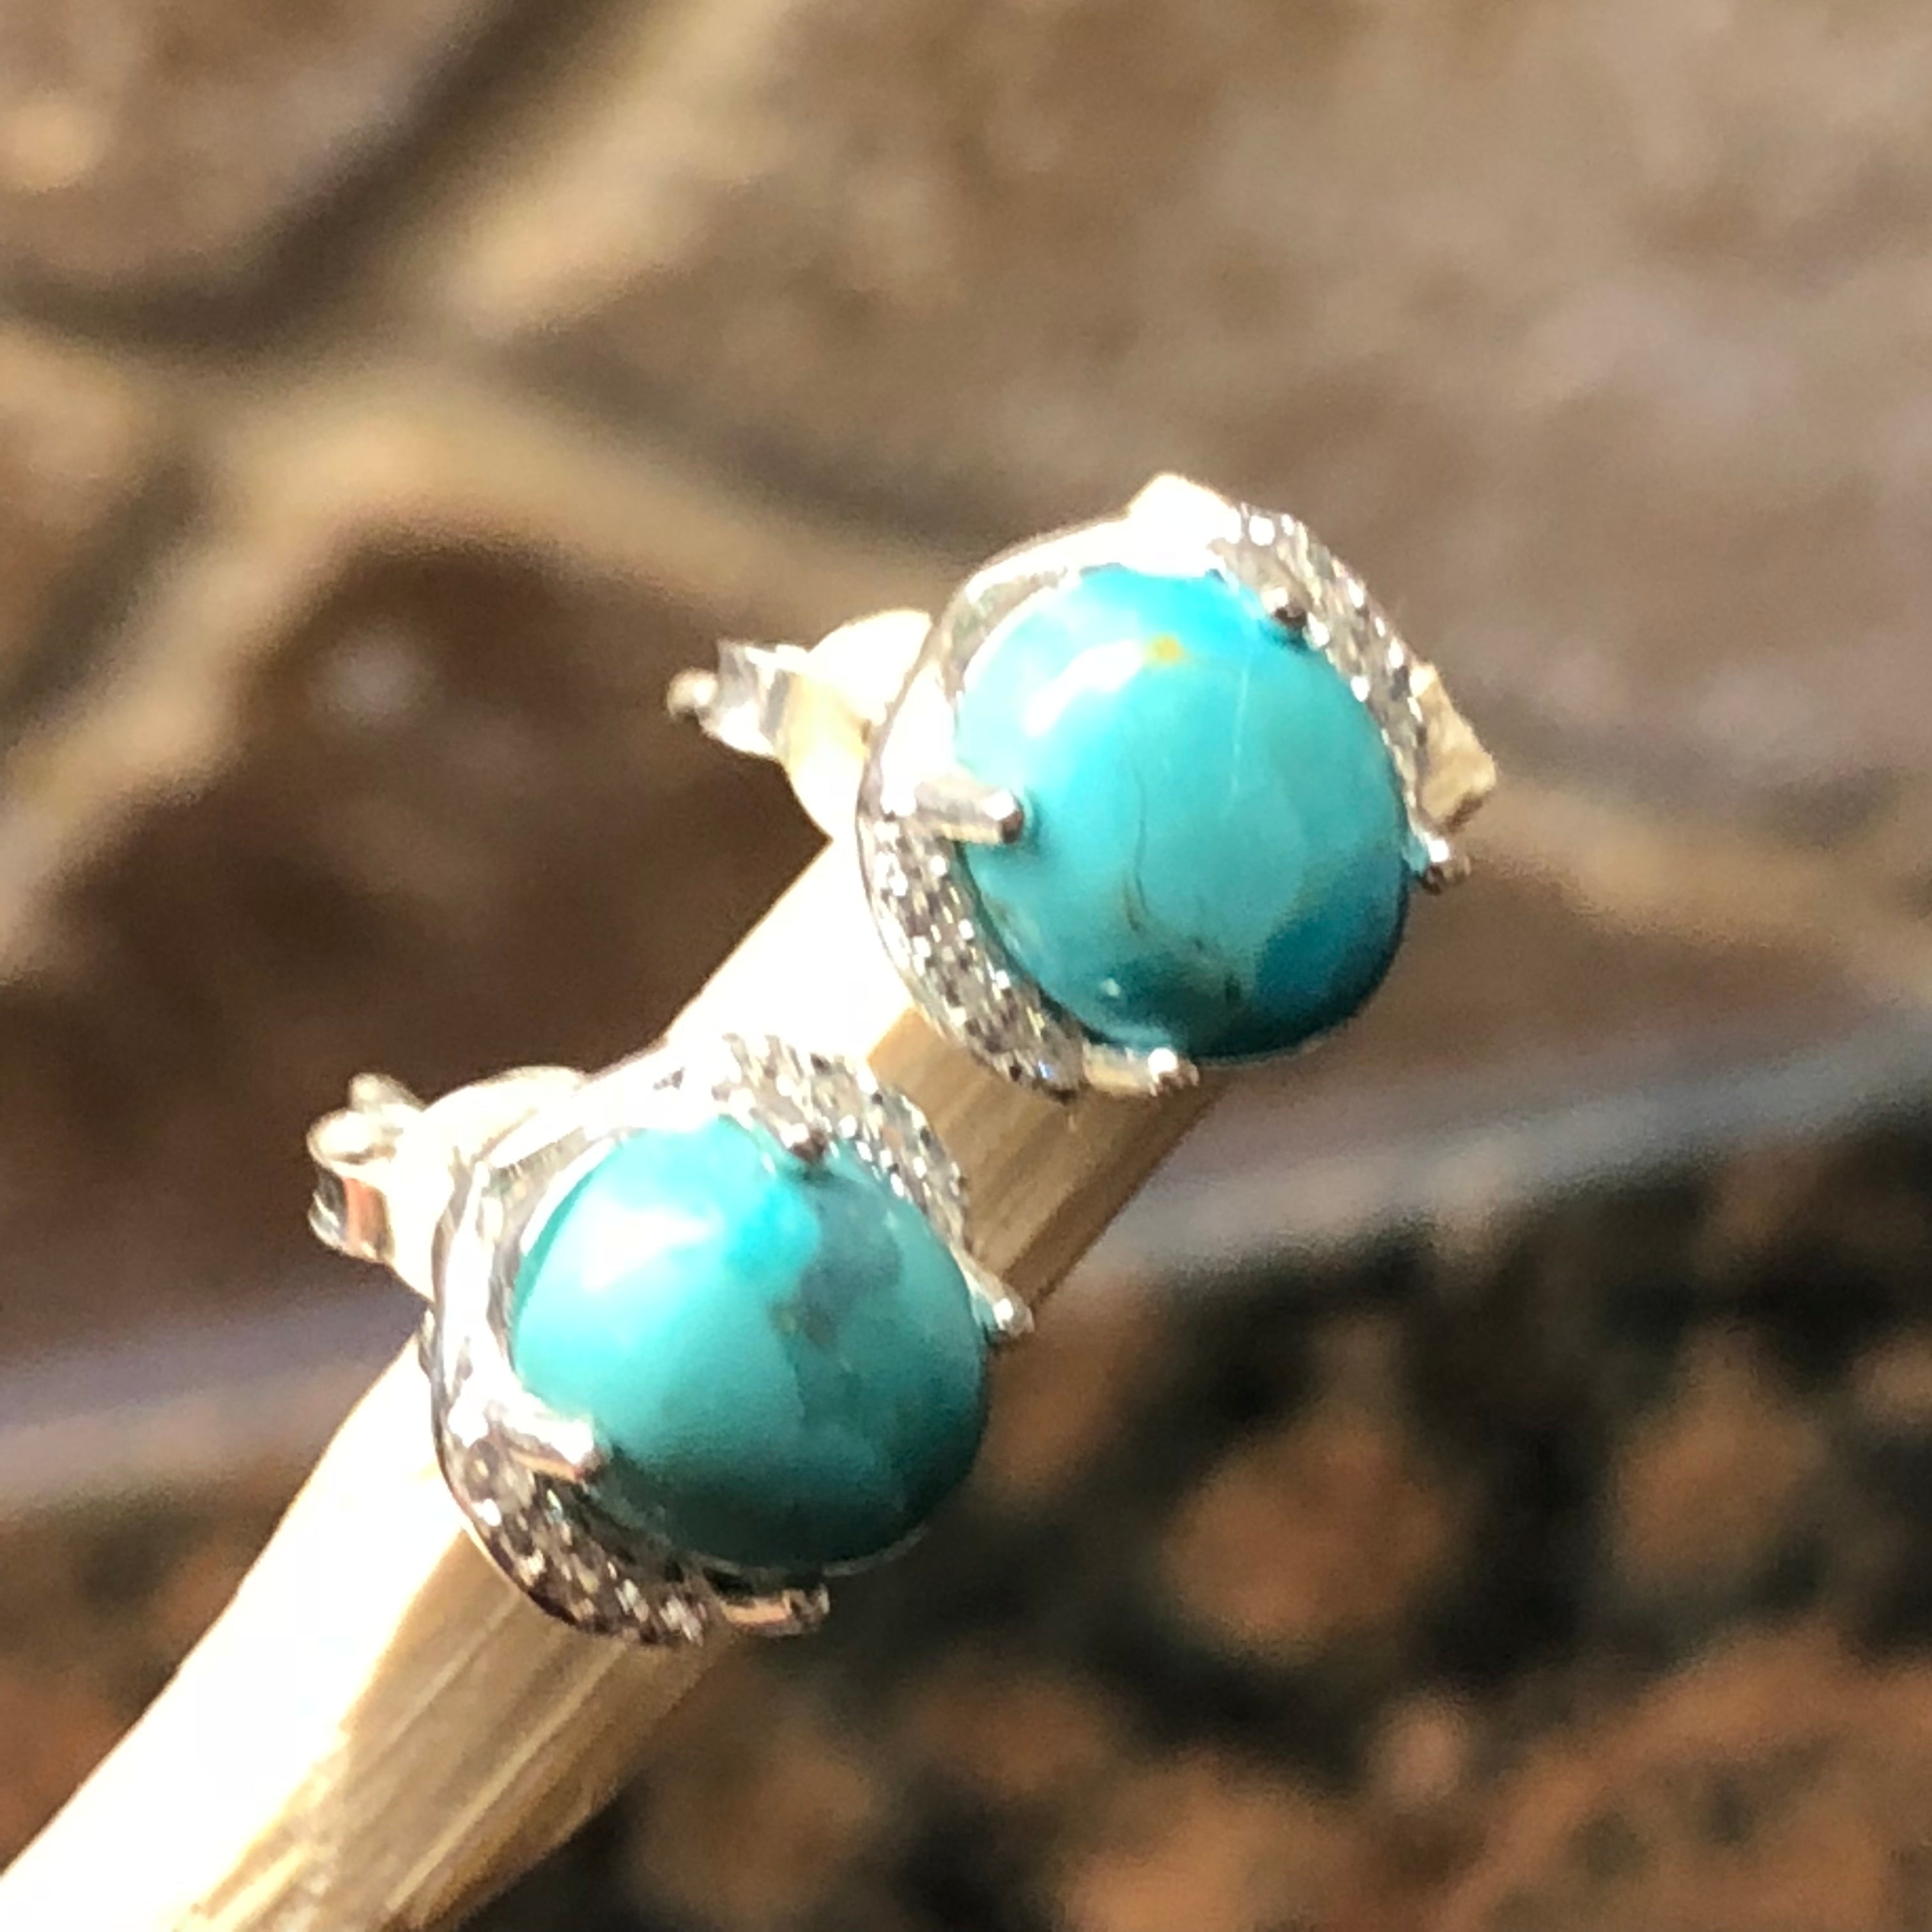 Natural Blue Mohave Turquoise 925 Solid Sterling Silver Earrings 8mm - Natural Rocks by Kala